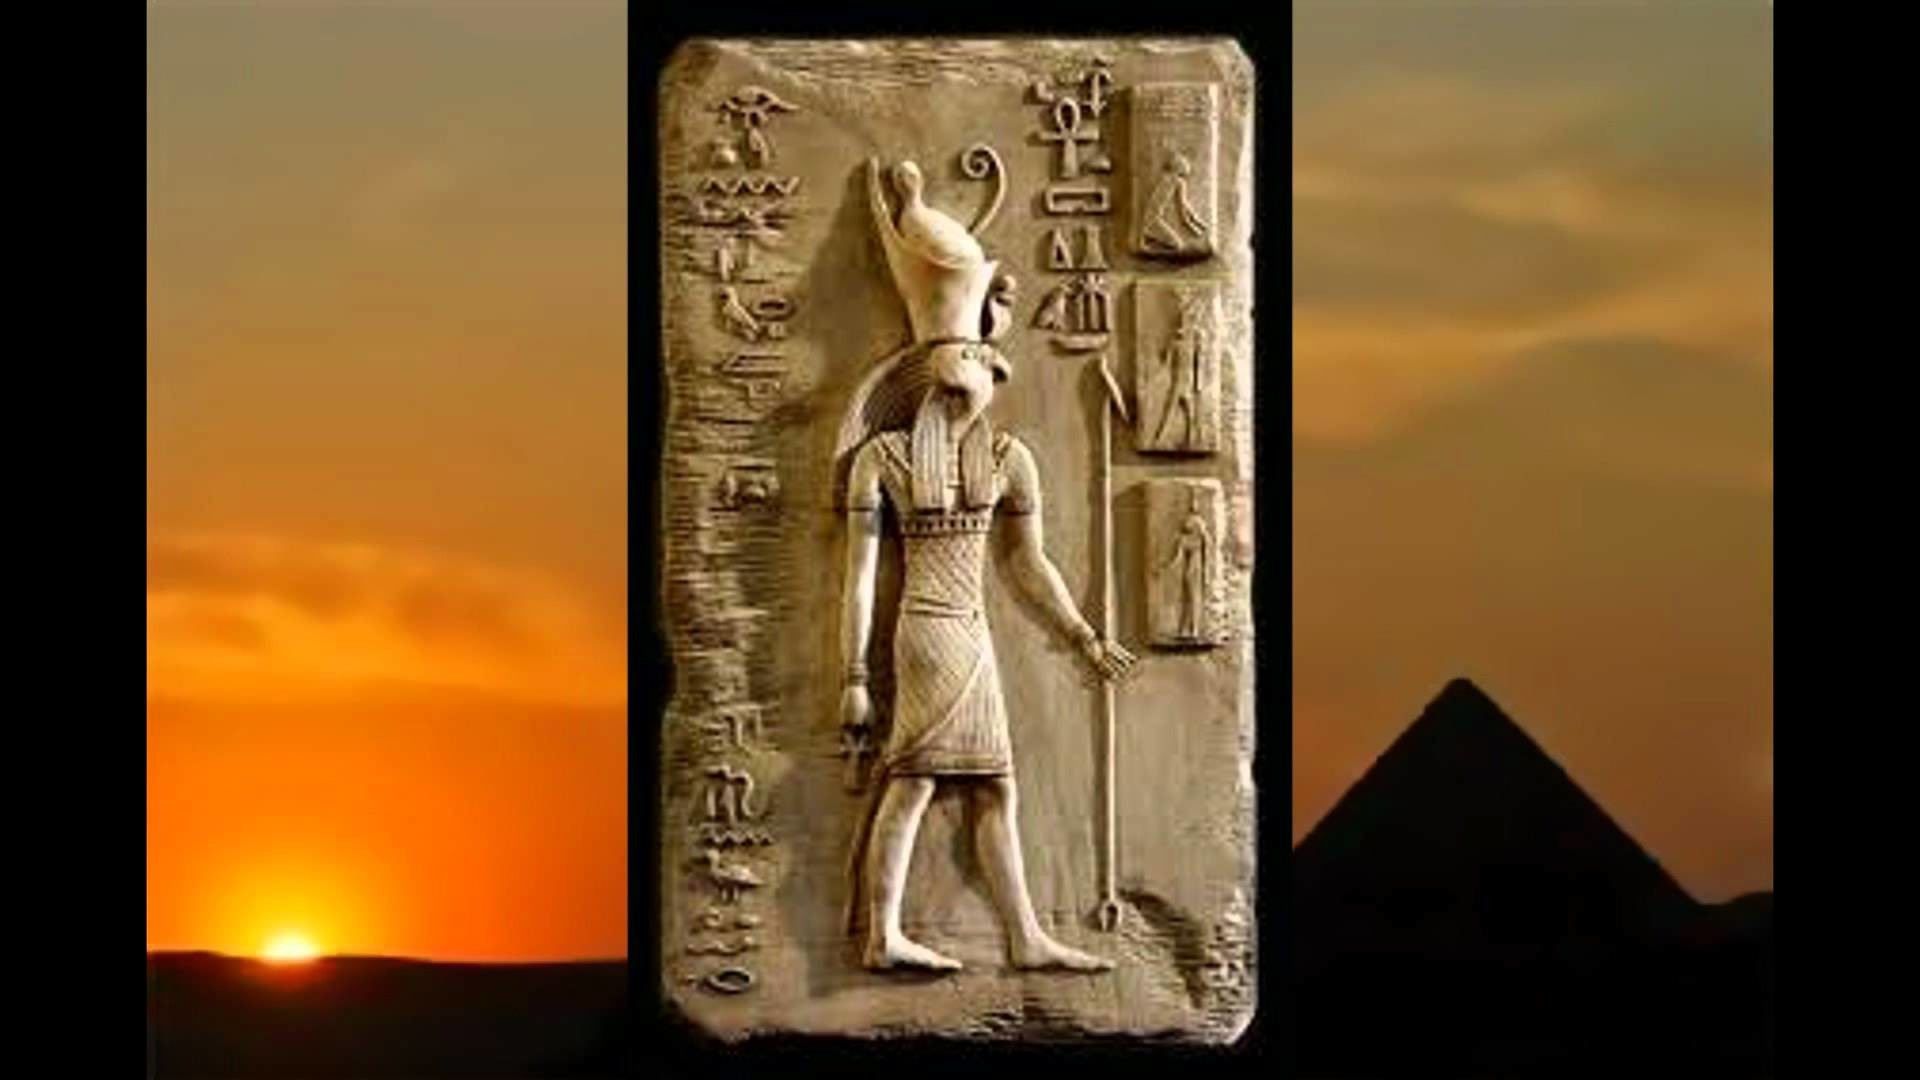 1920x1080 Ancient Egyptian Music - Amun Ra's Anthem to the Rising Sun from the CD  Tears of Isis - YouTube